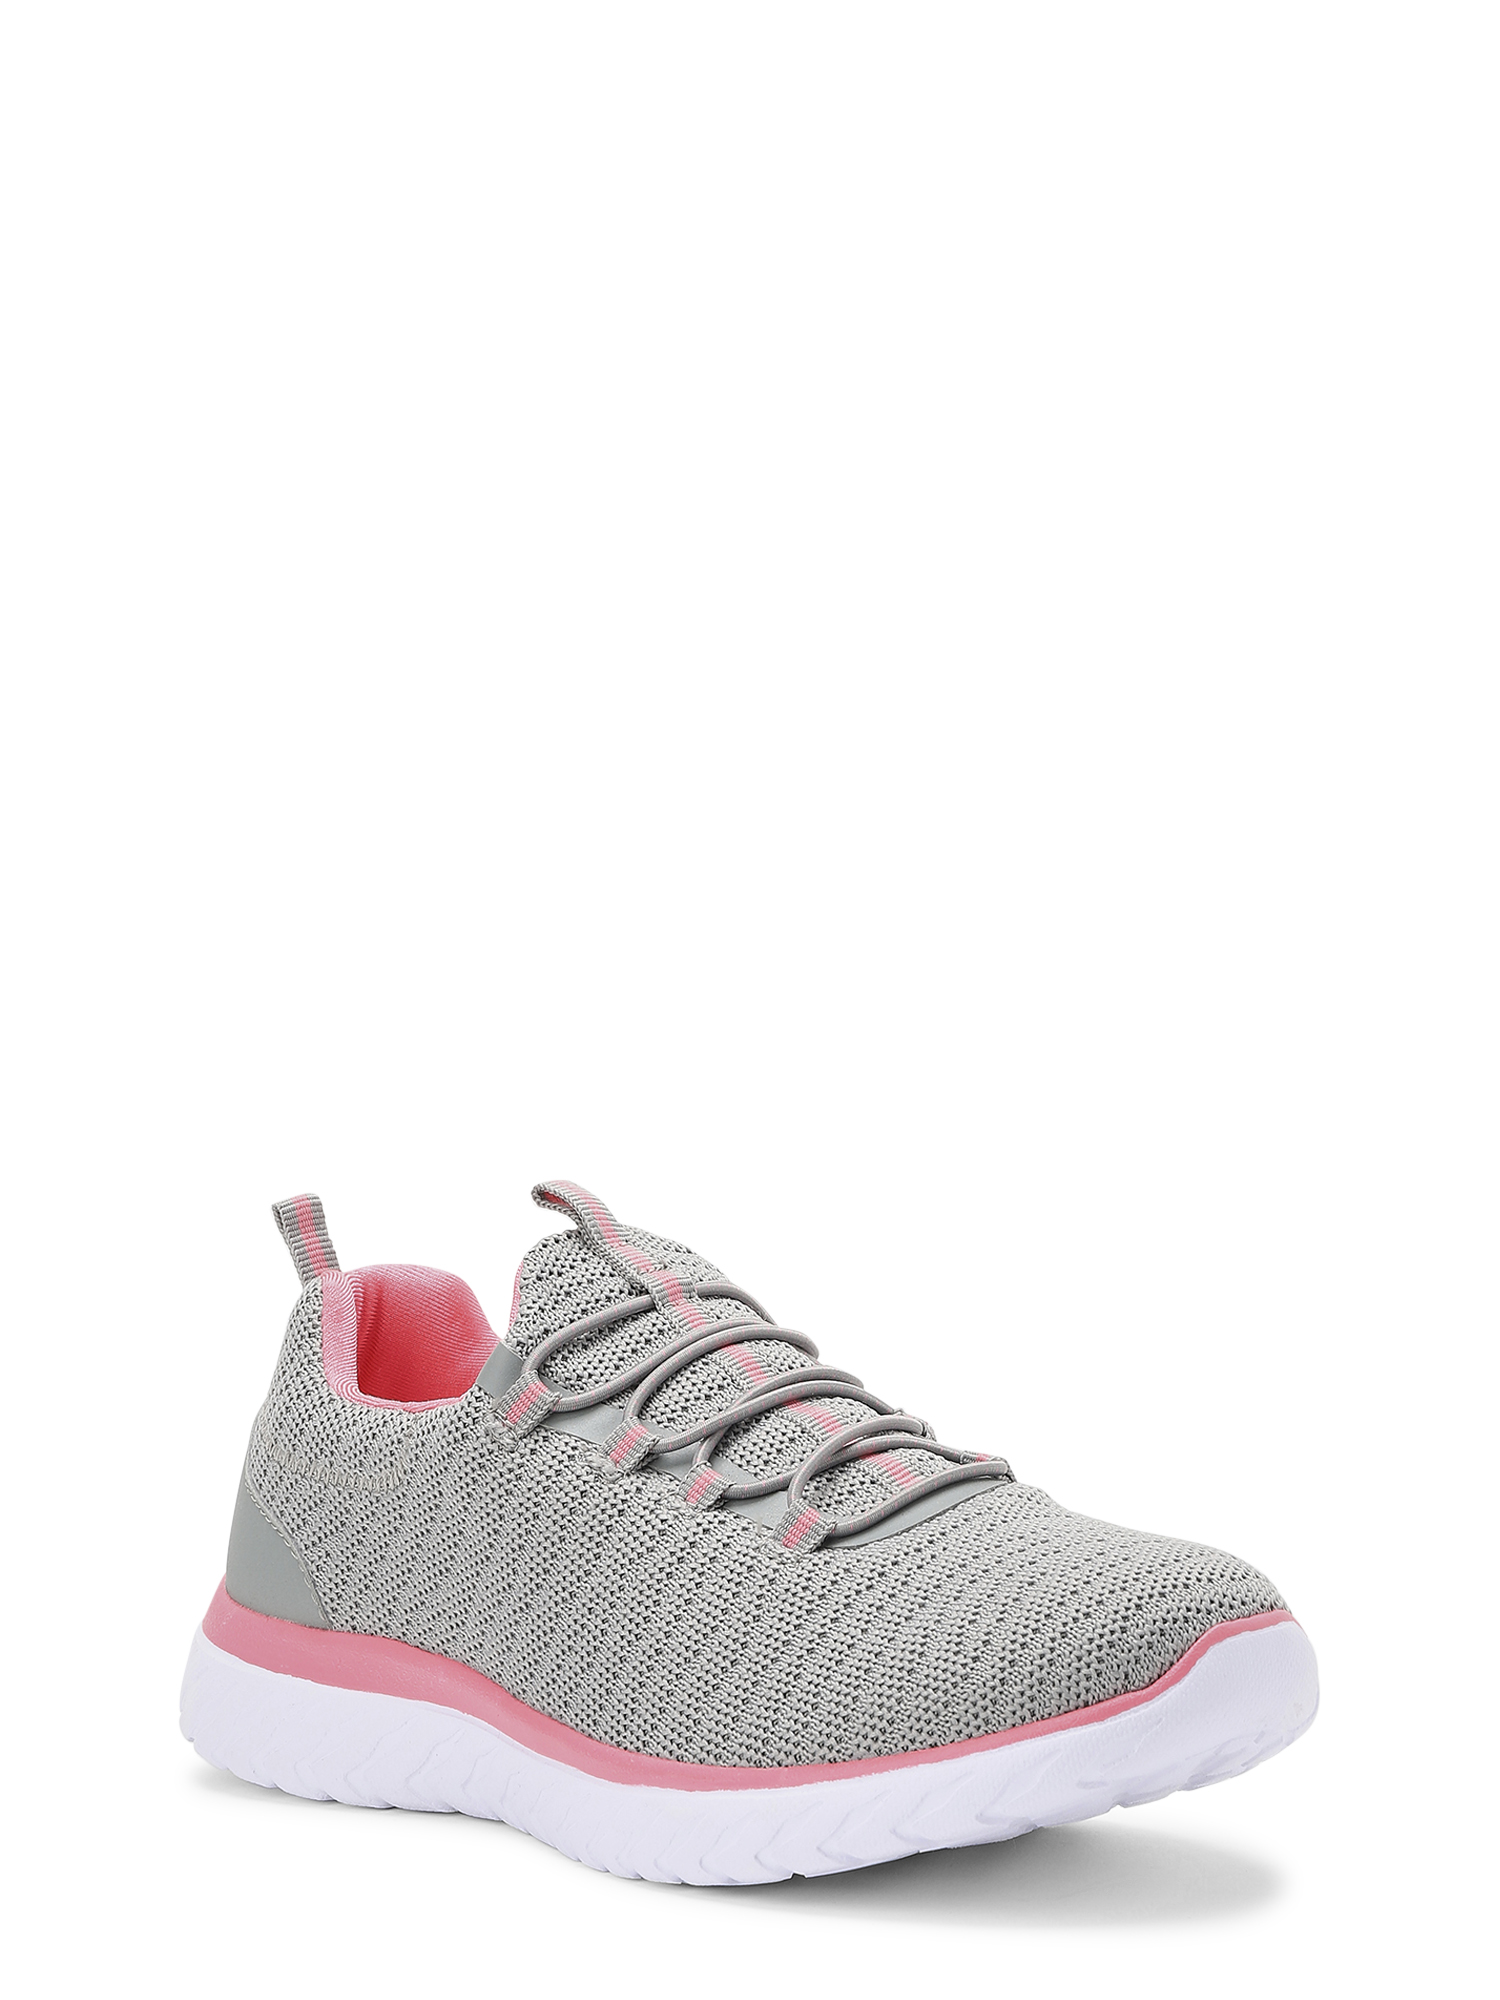 Athletic Works Women’s Bungee Slip On Sneakers, Wide Width Available - image 1 of 6